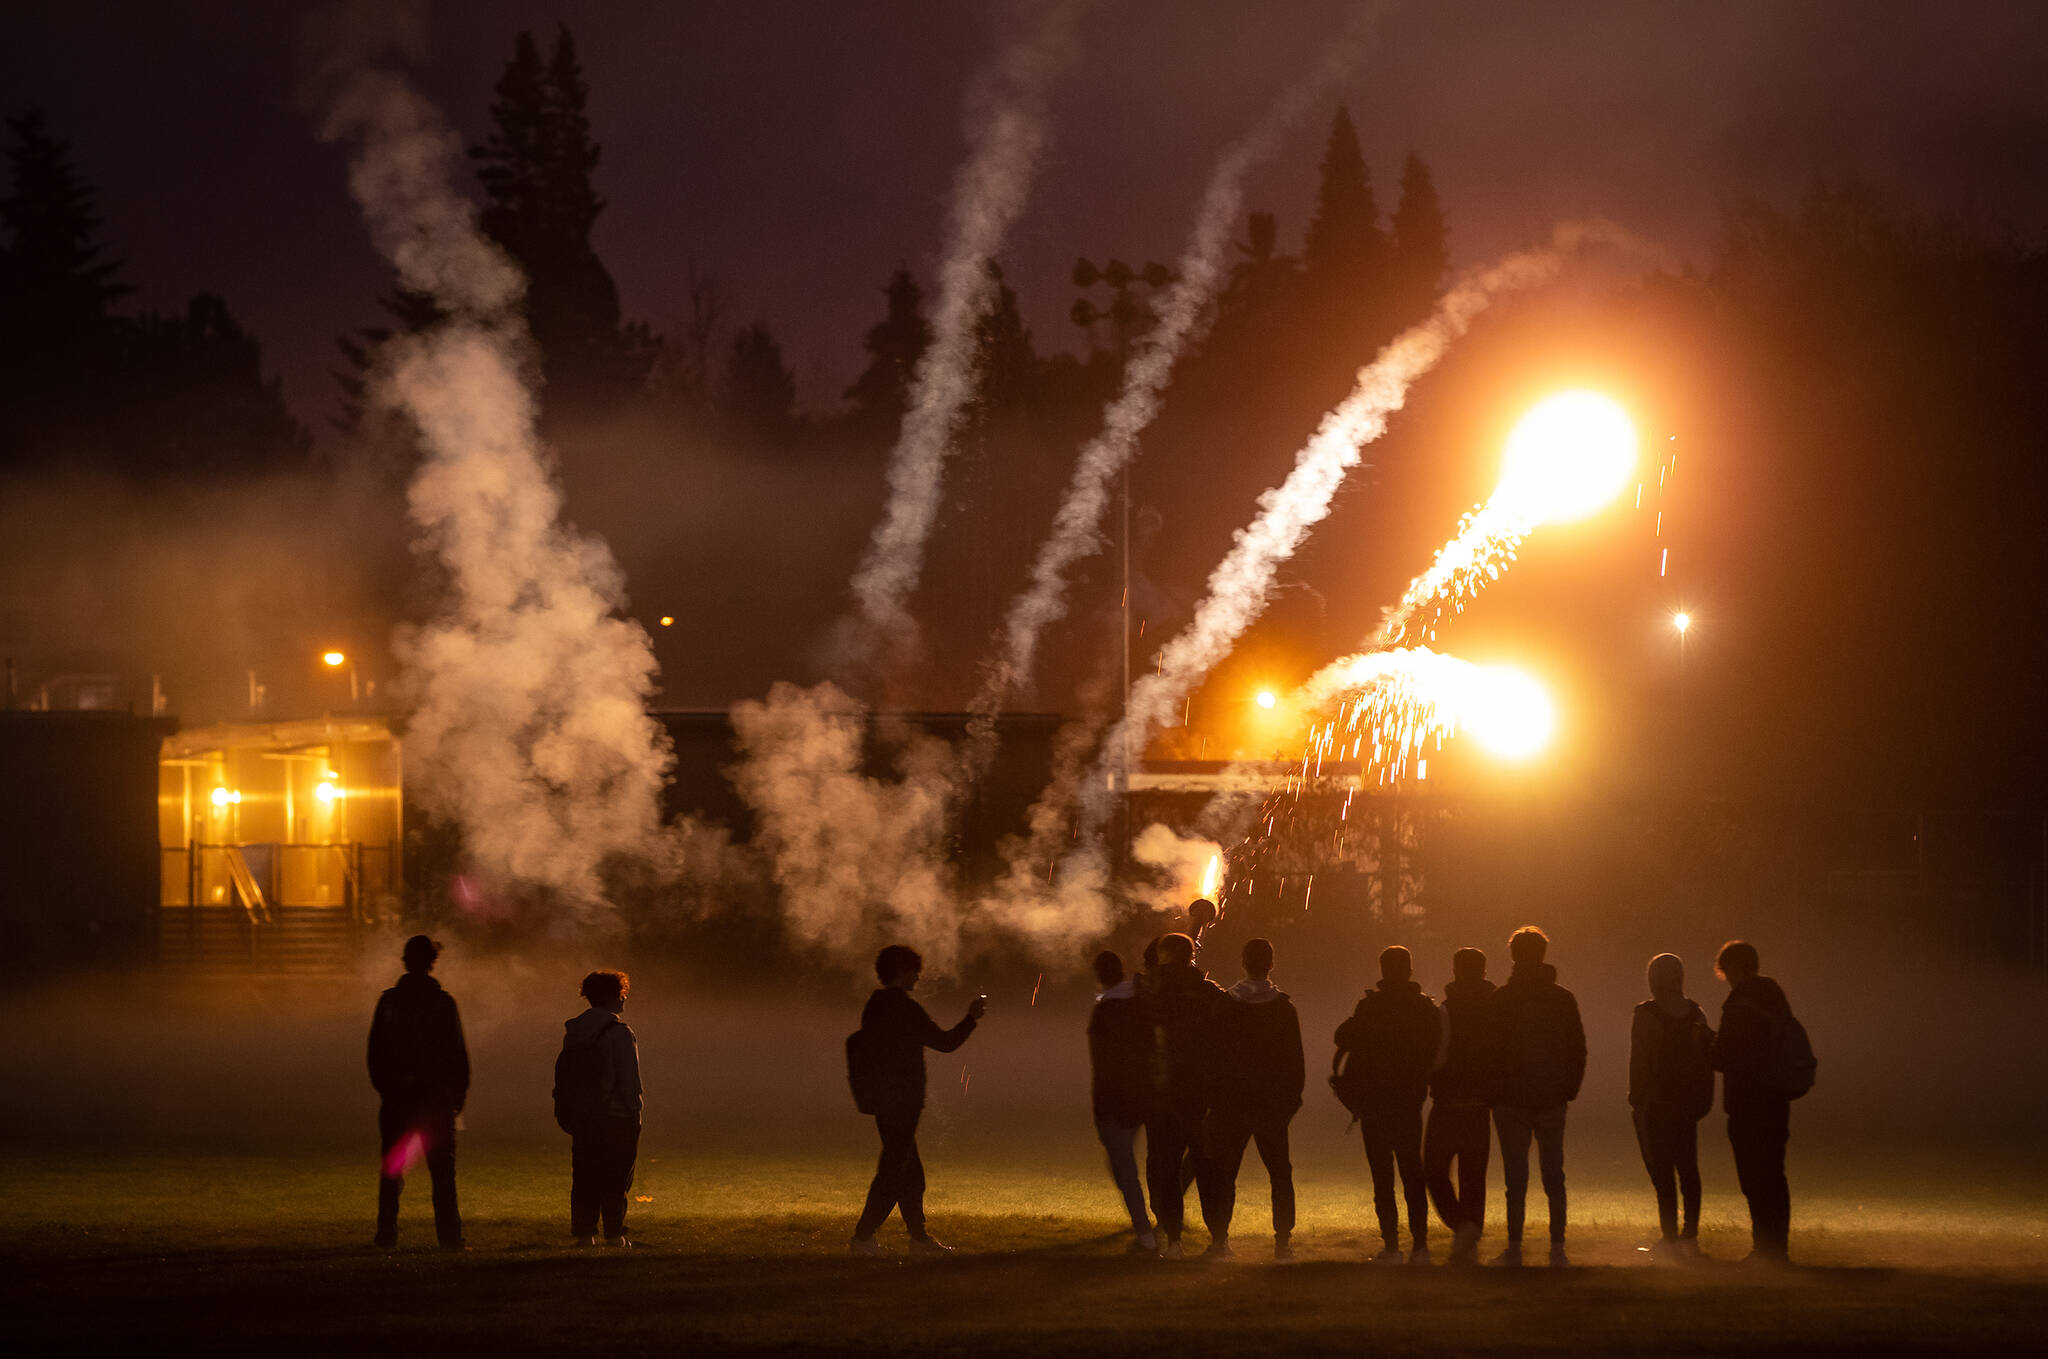 A group of young men shoot off fireworks on Halloween in Vancouver, on Saturday, October 31, 2020. THE CANADIAN PRESS/Darryl Dyck